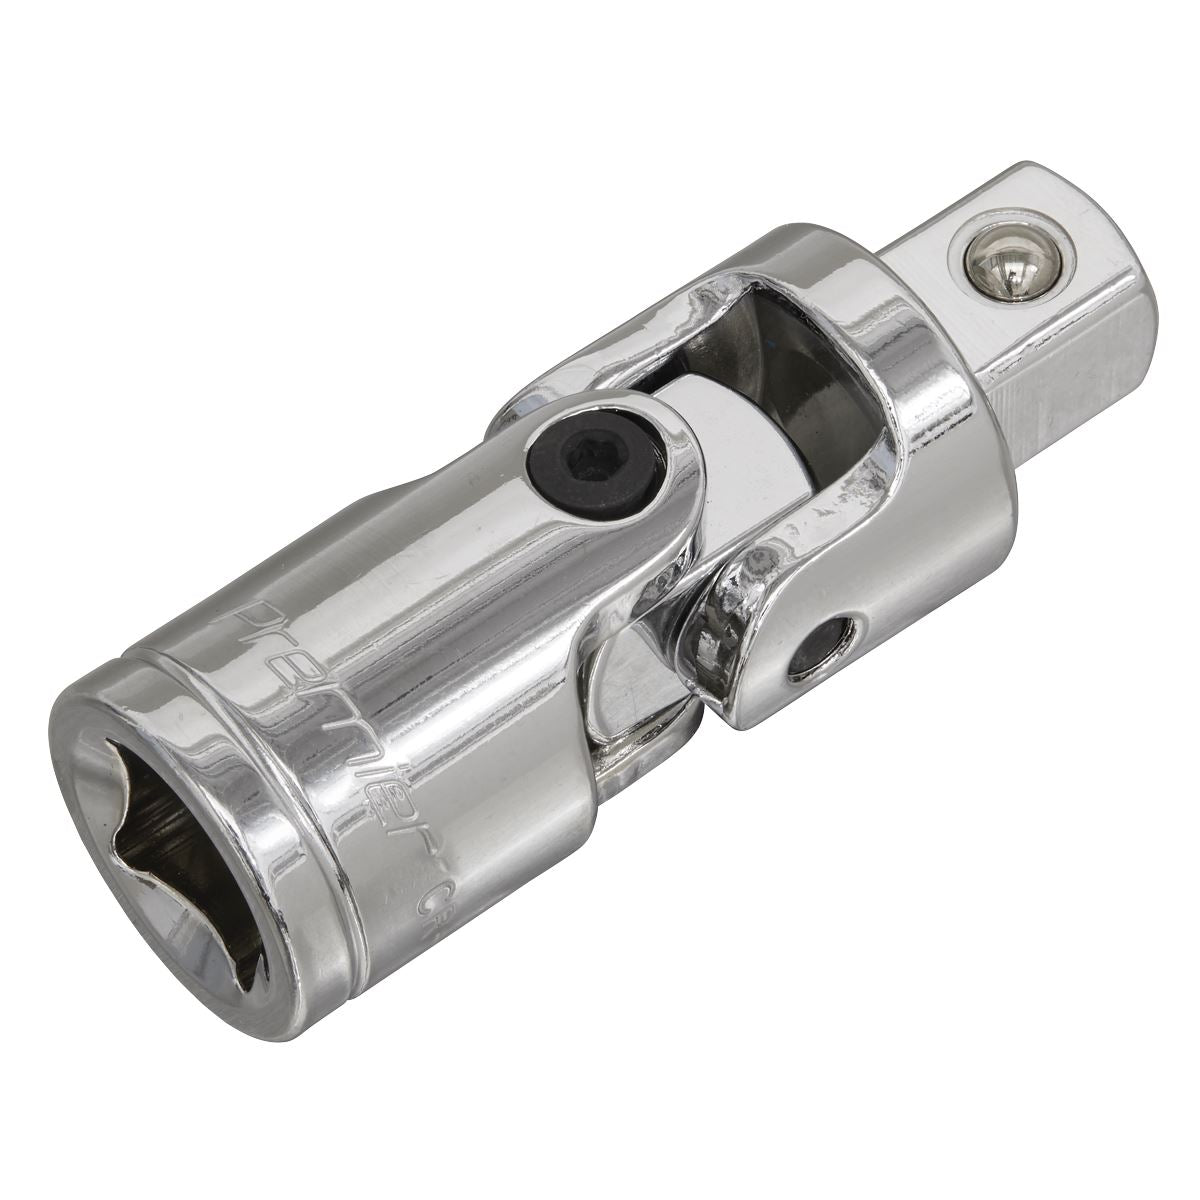 Sealey Premier Universal Joint 1/2"Sq Drive